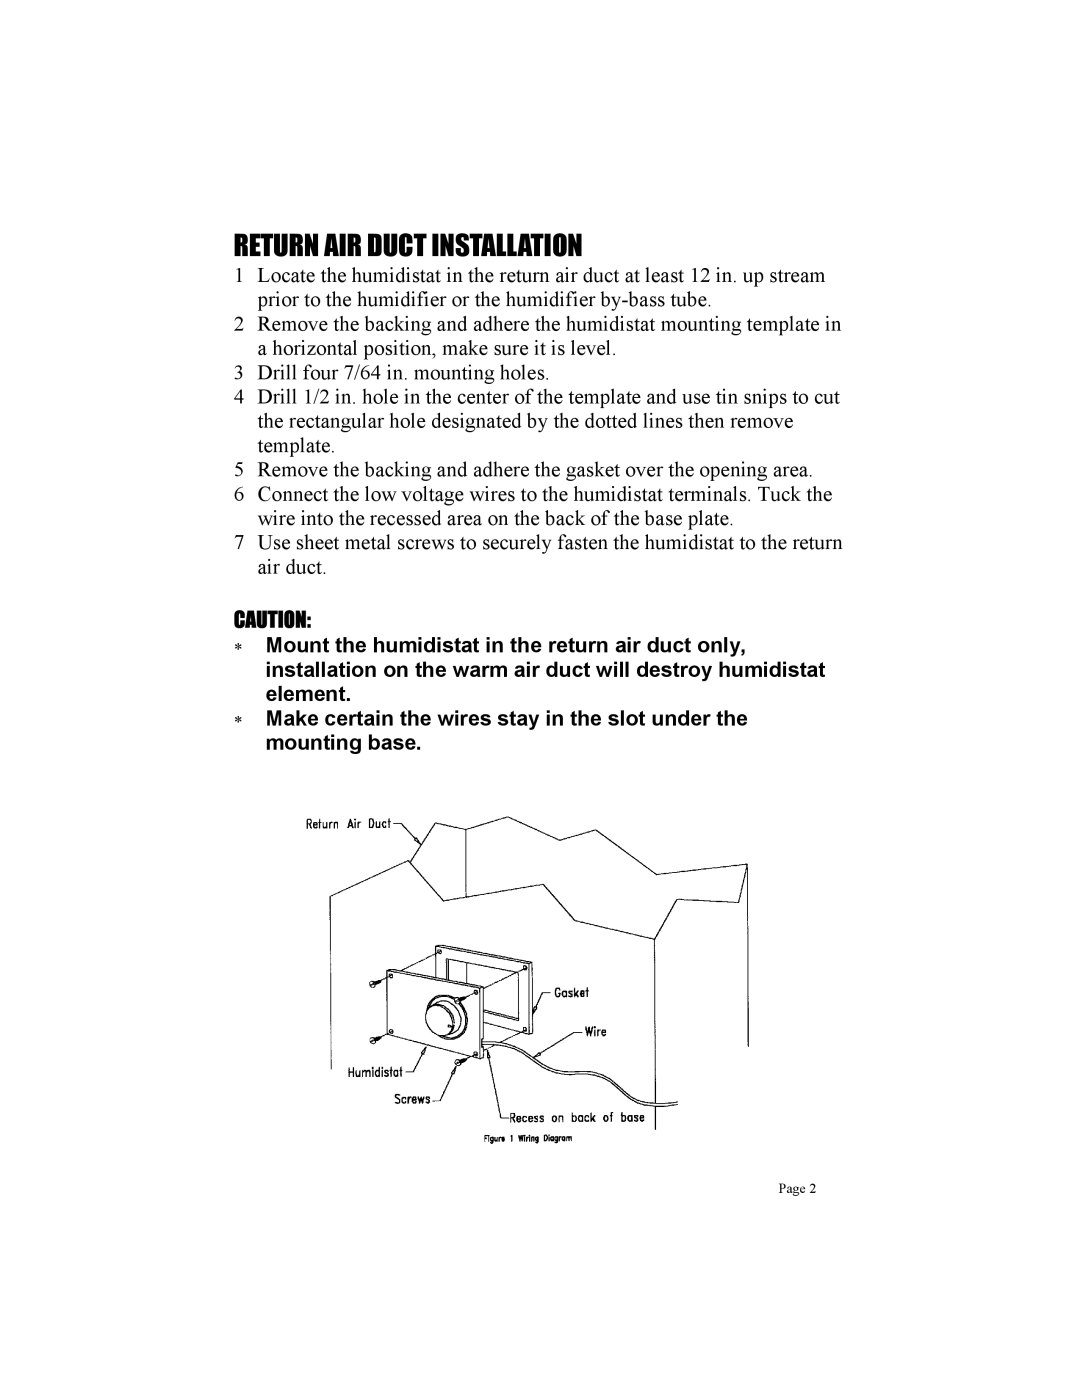 Skuttle Indoor Air Quality Products SK0-0055-001 installation instructions Return Air Duct Installation 